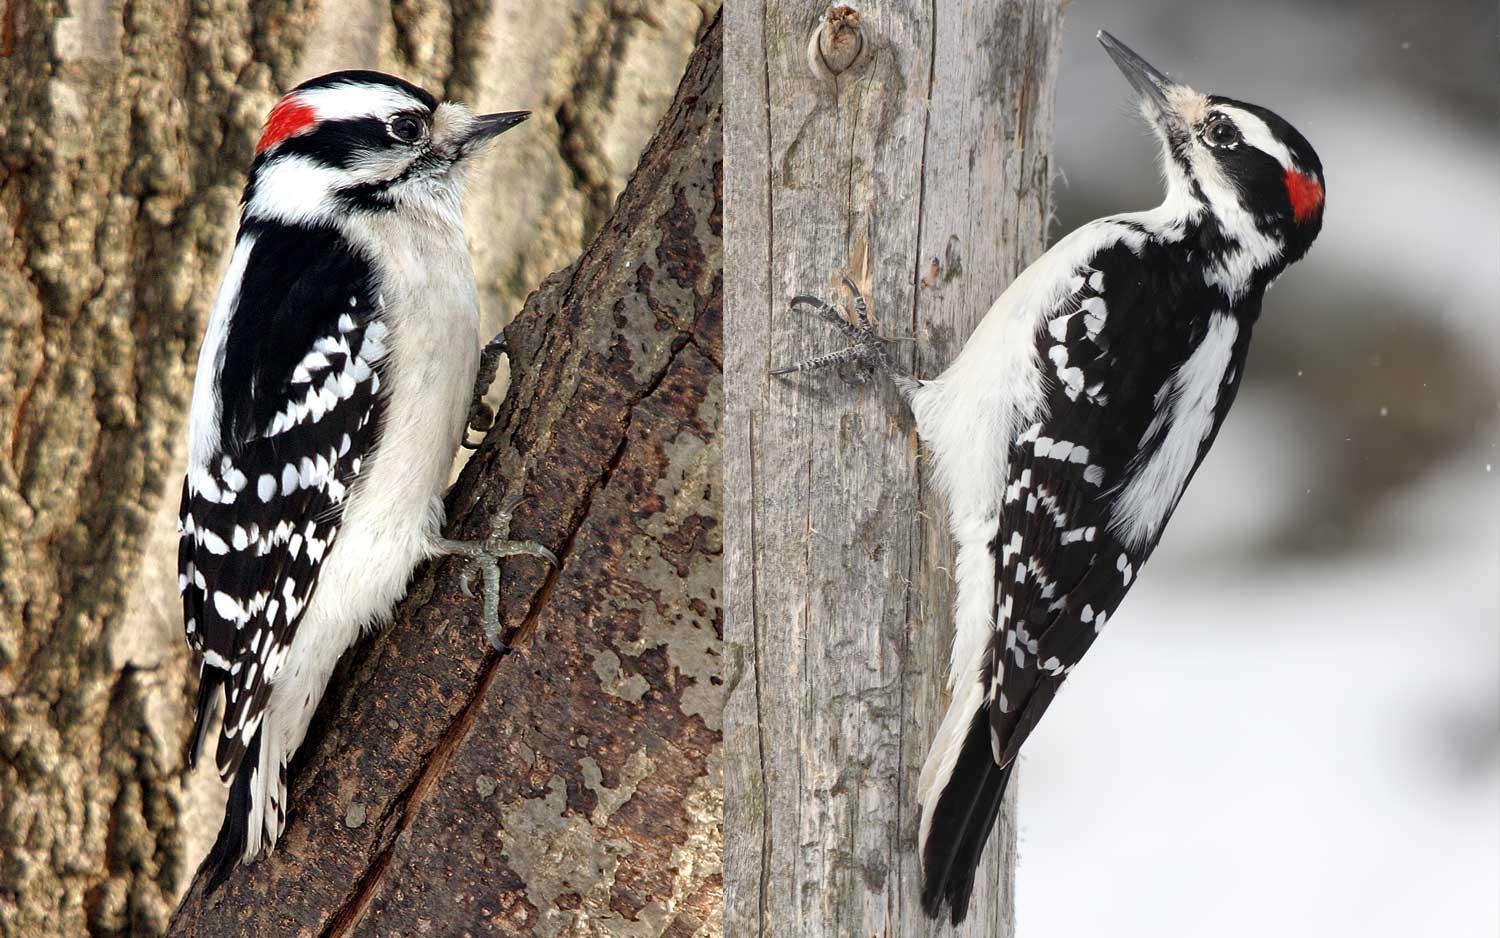 A side by side comparison of a downy woodpecker and hairy woodpecker